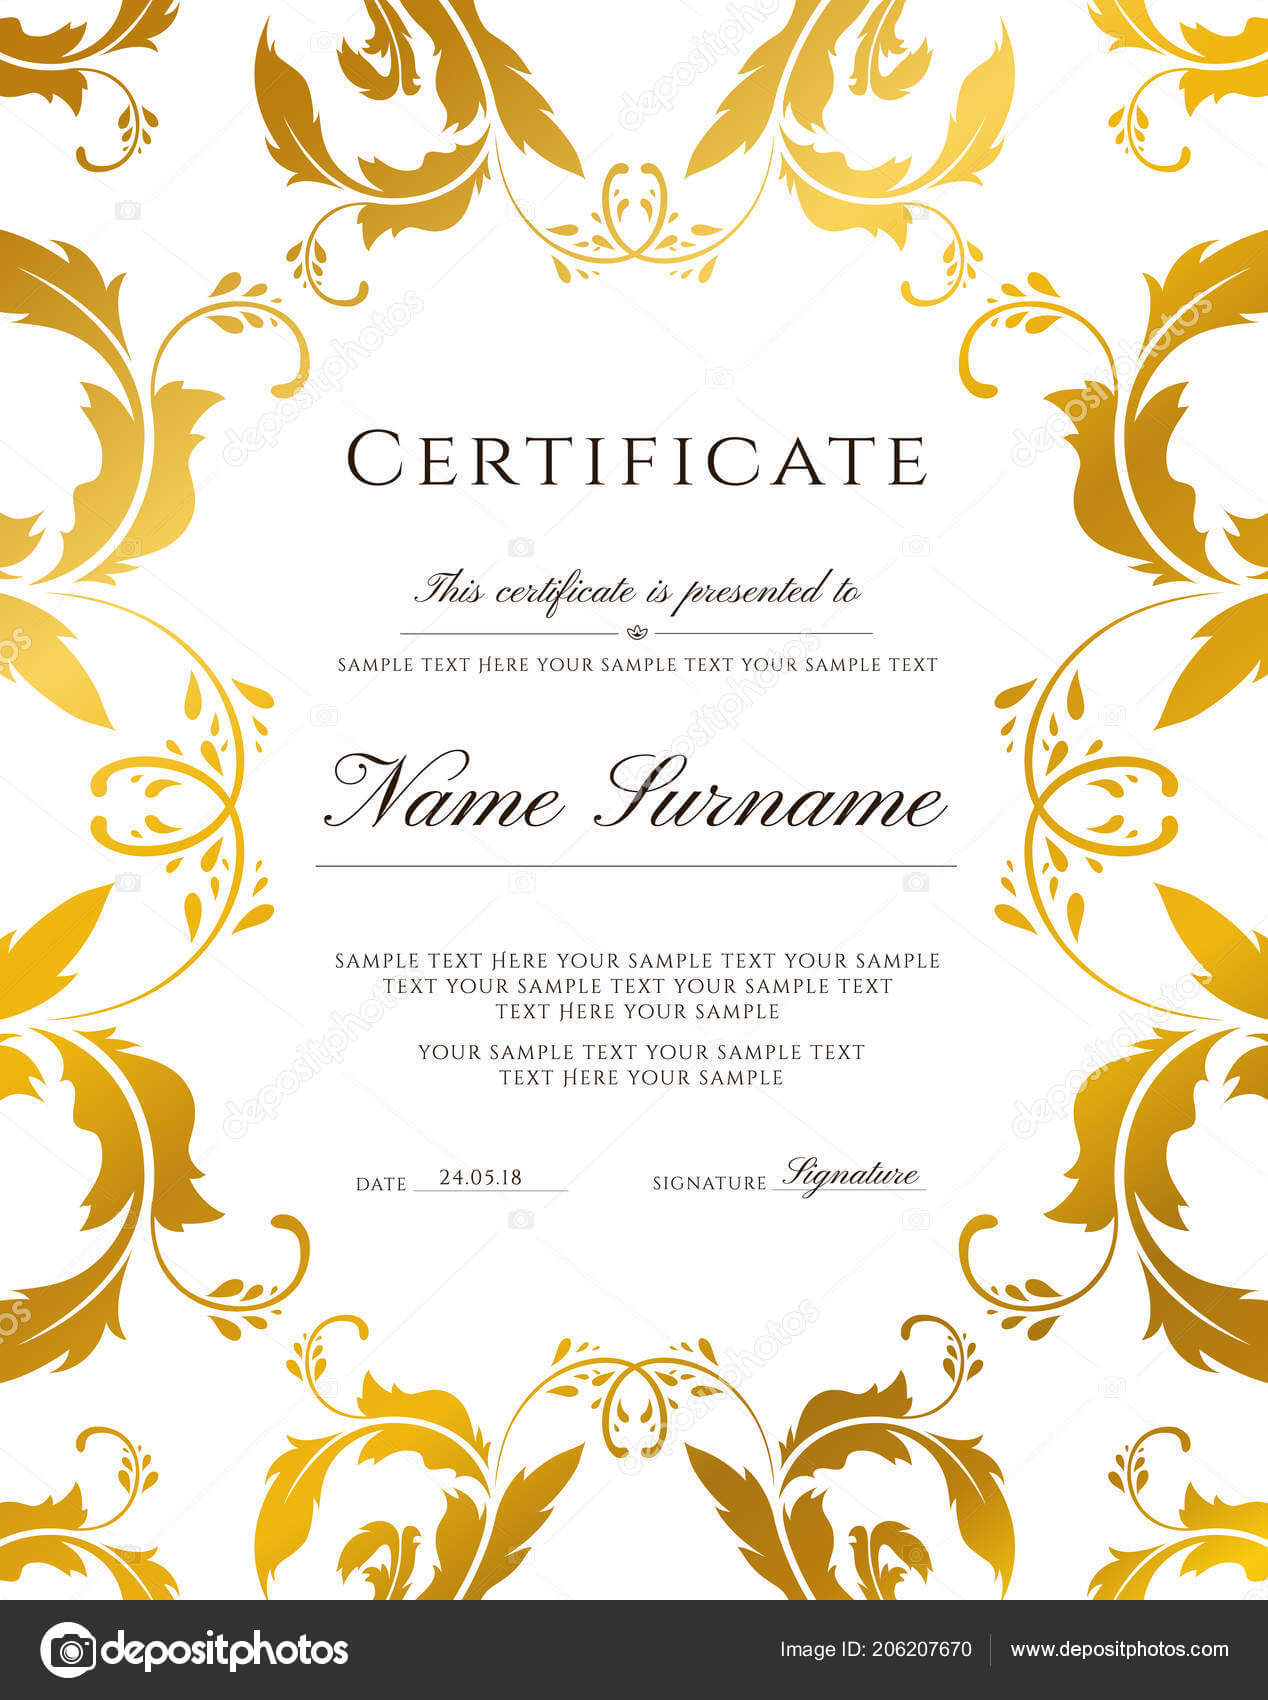 Gold Border Template | Certificate Template Gold Border Pertaining To Award Certificate Border Template